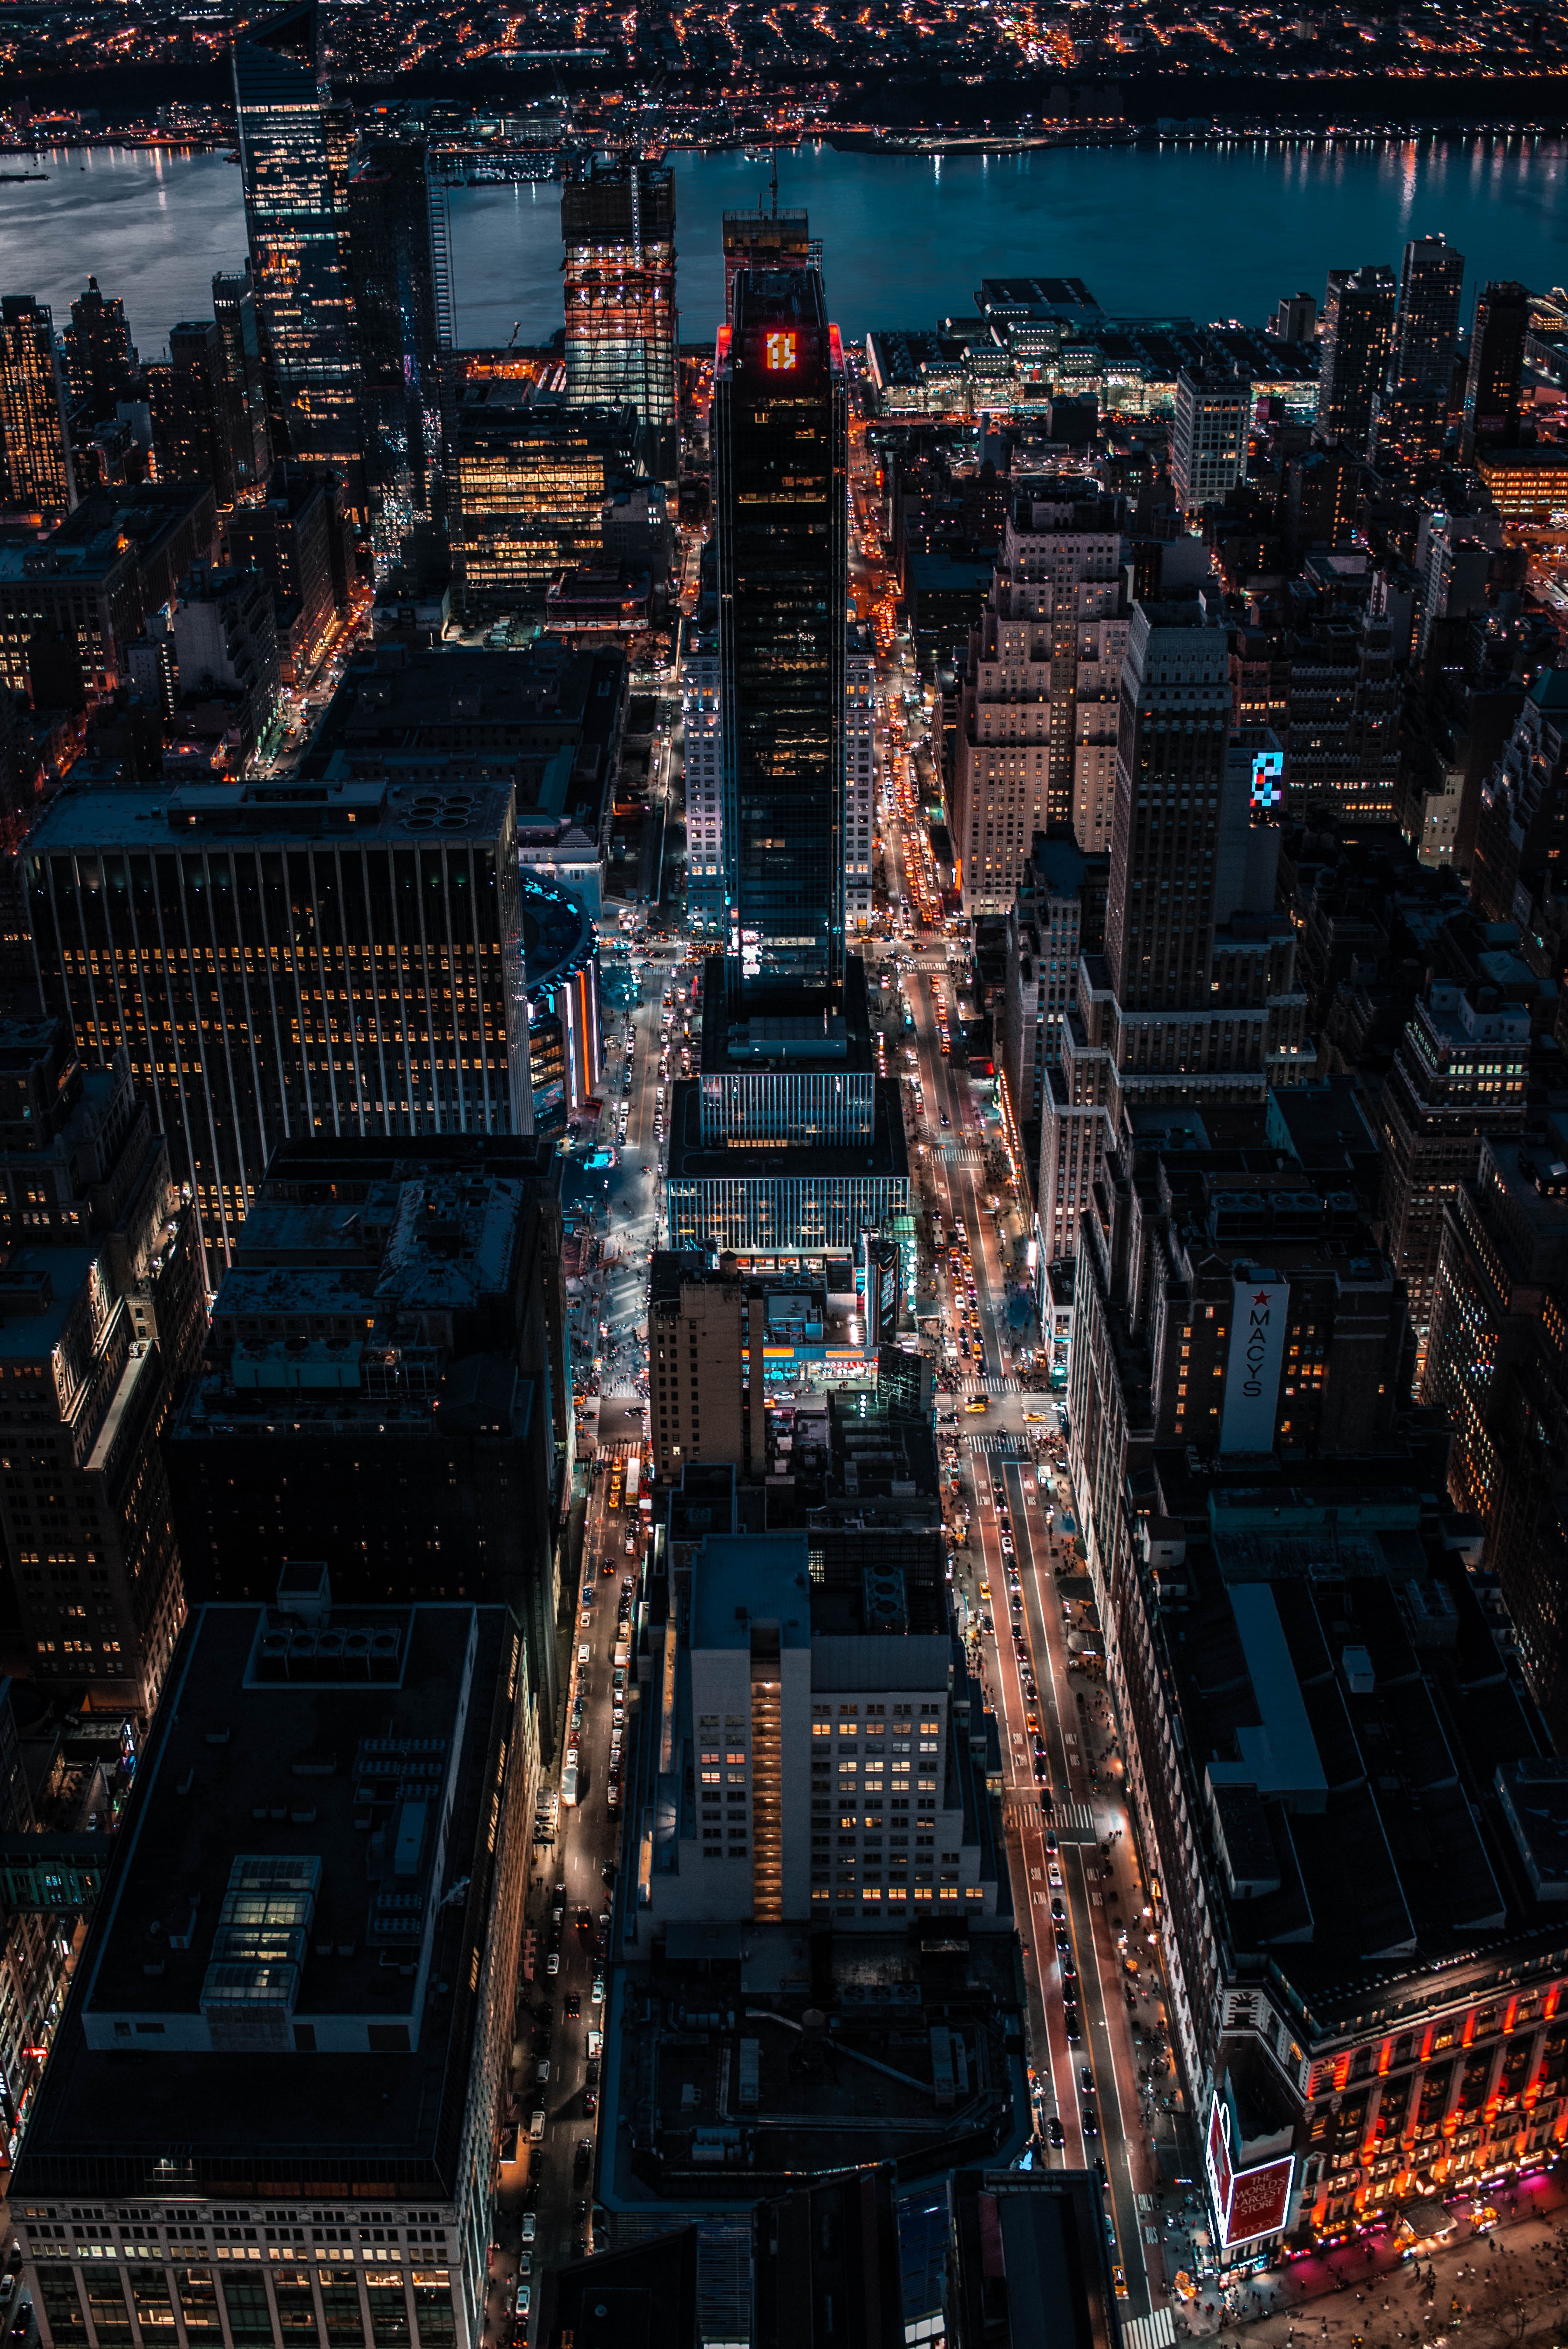 view from above, megalopolis, cities, building, night city, city lights, skyscrapers, megapolis images